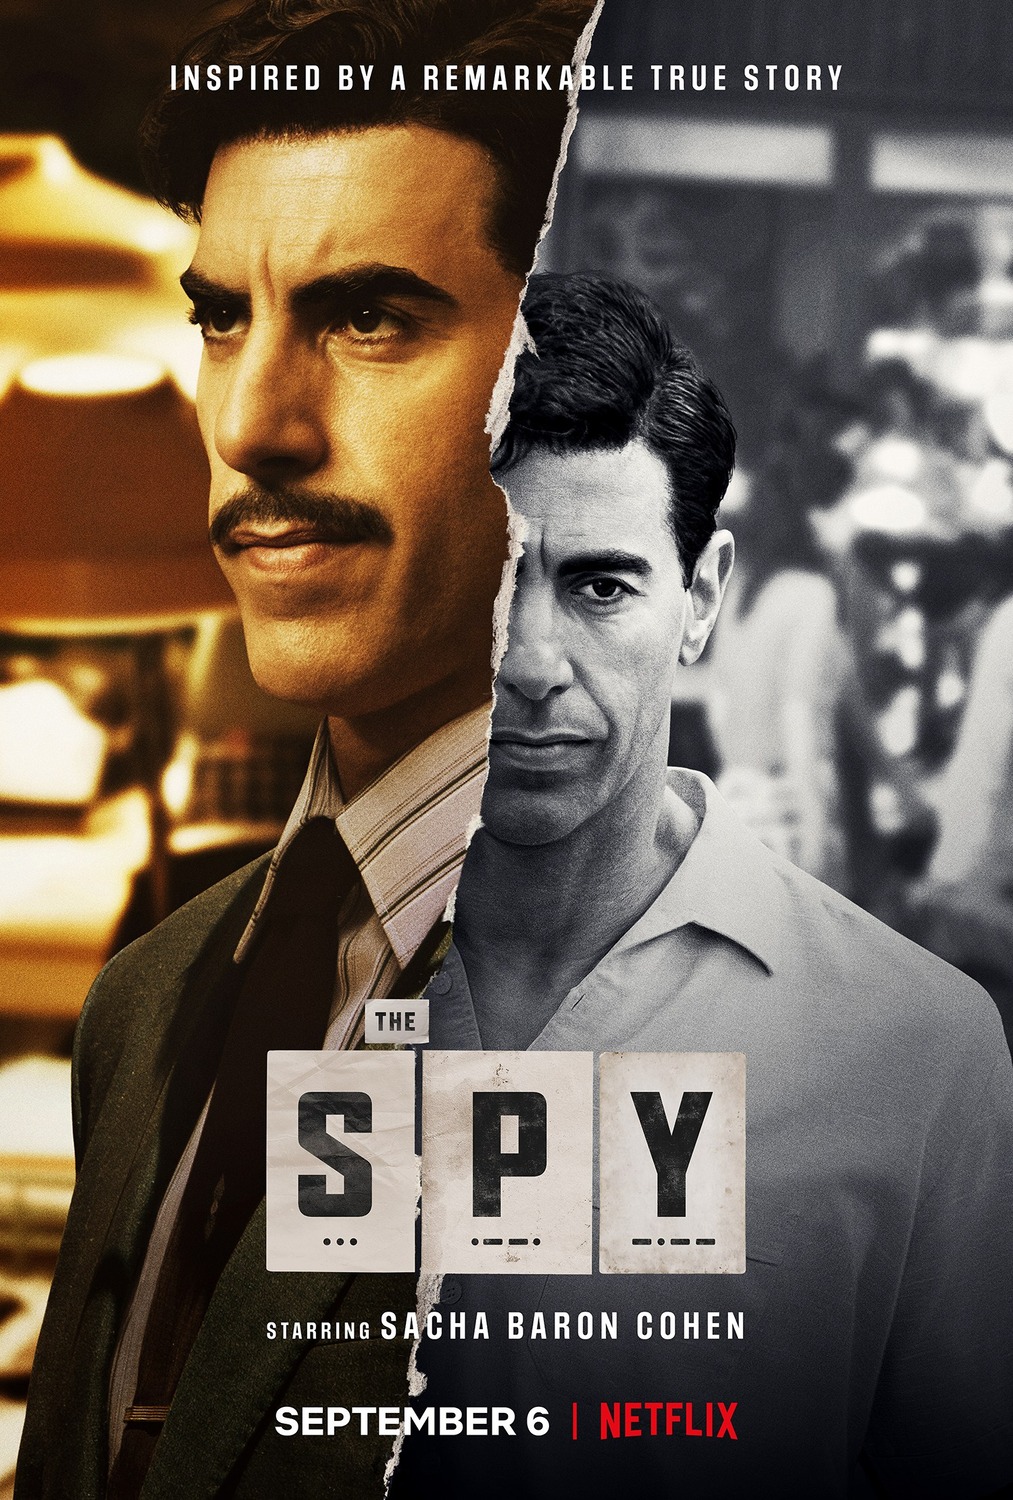 Netflix’s The Spy Review: Outstanding Performance by Sacha Baron 16